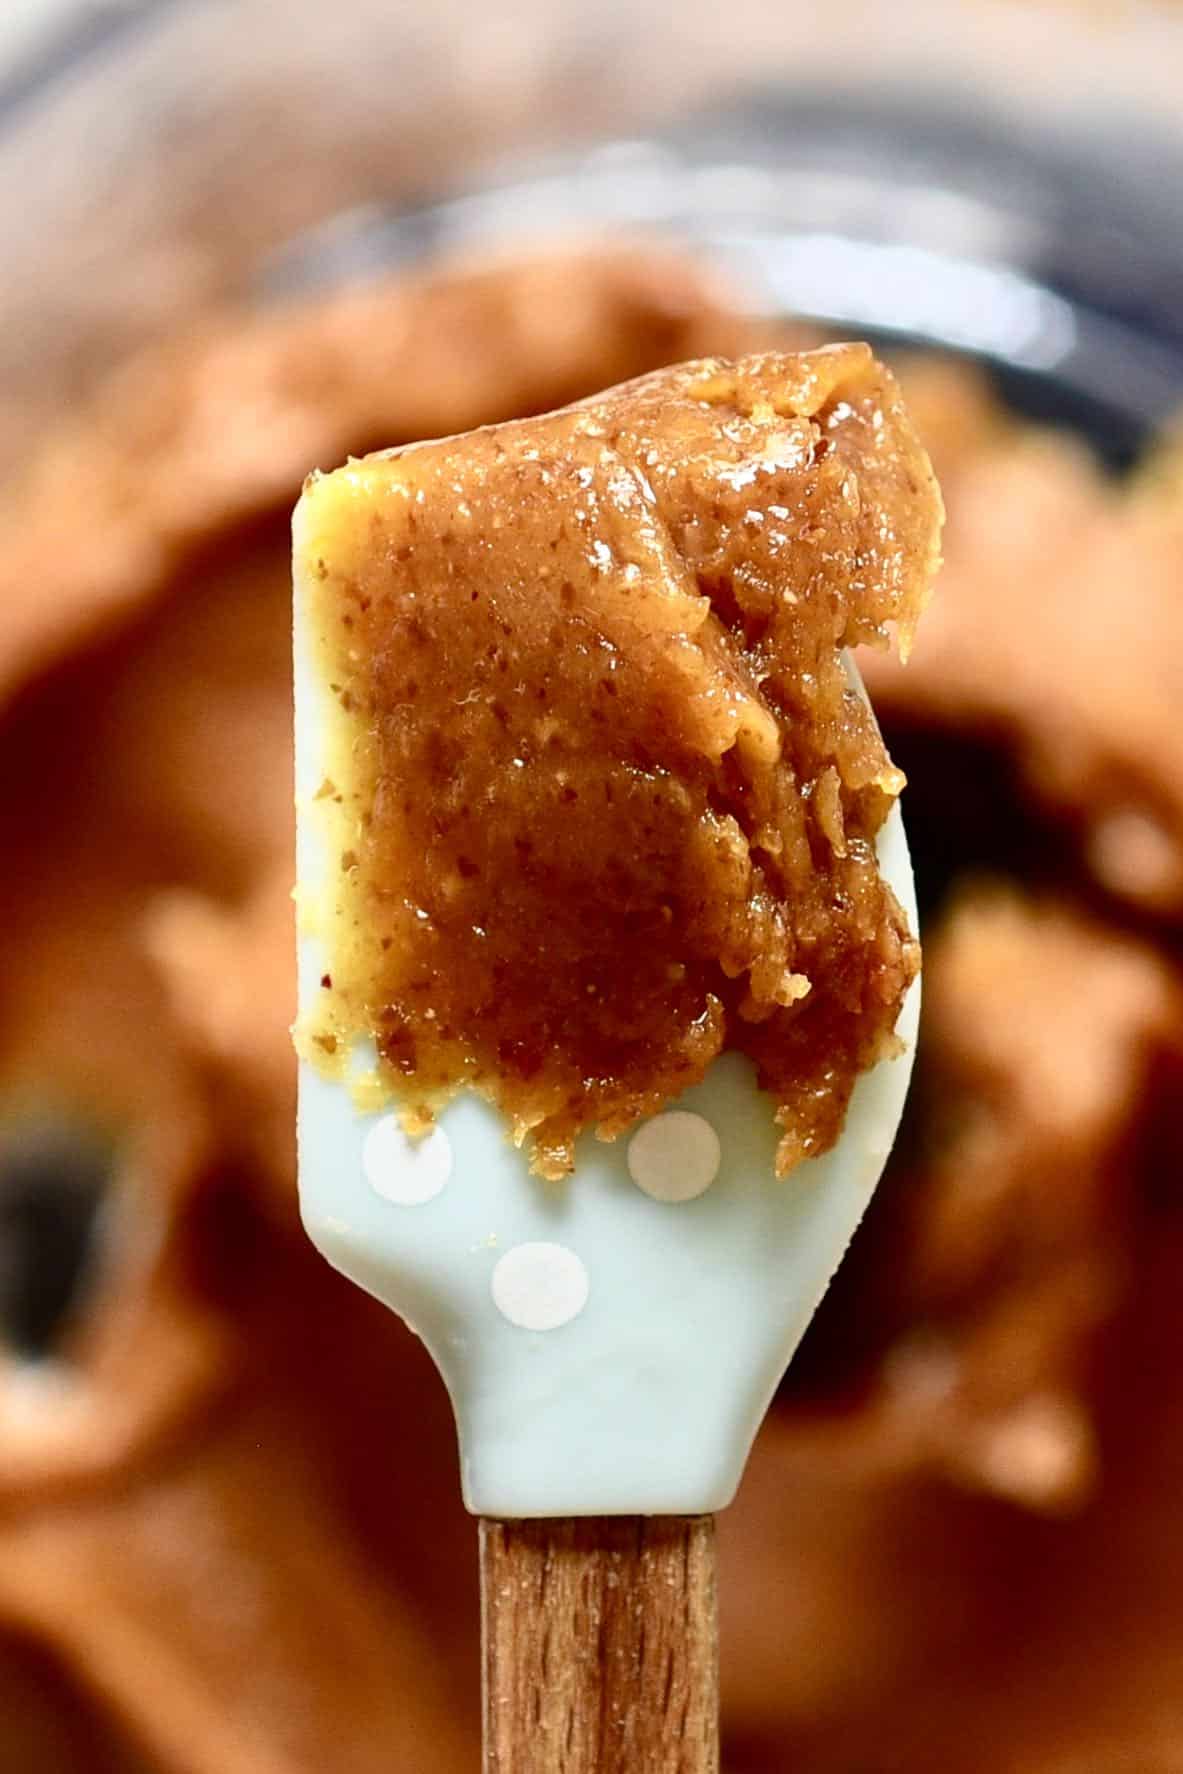 A spoonful of Healthy Caramel Sauce